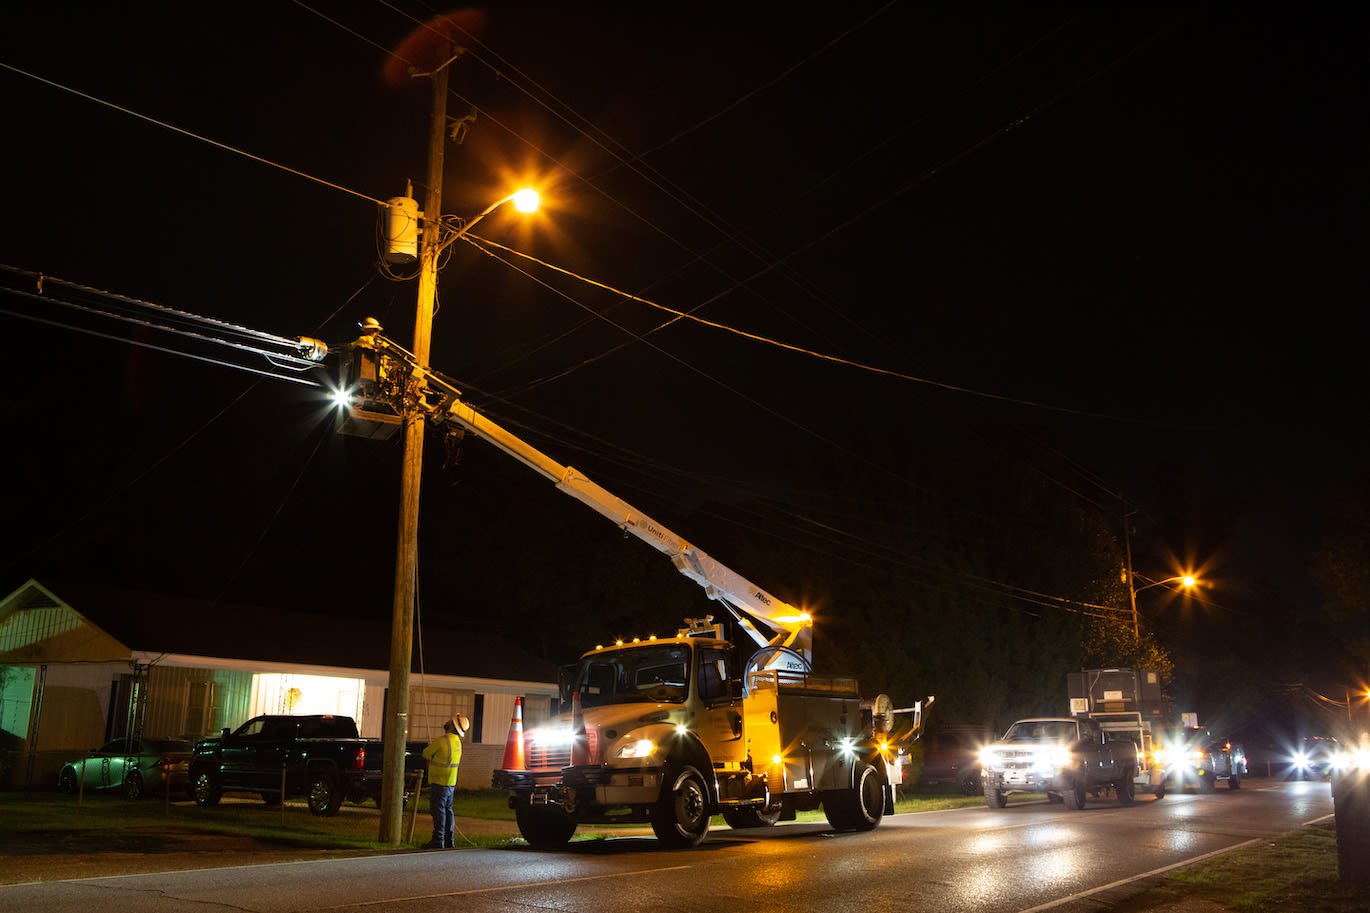 Utility workers at night 